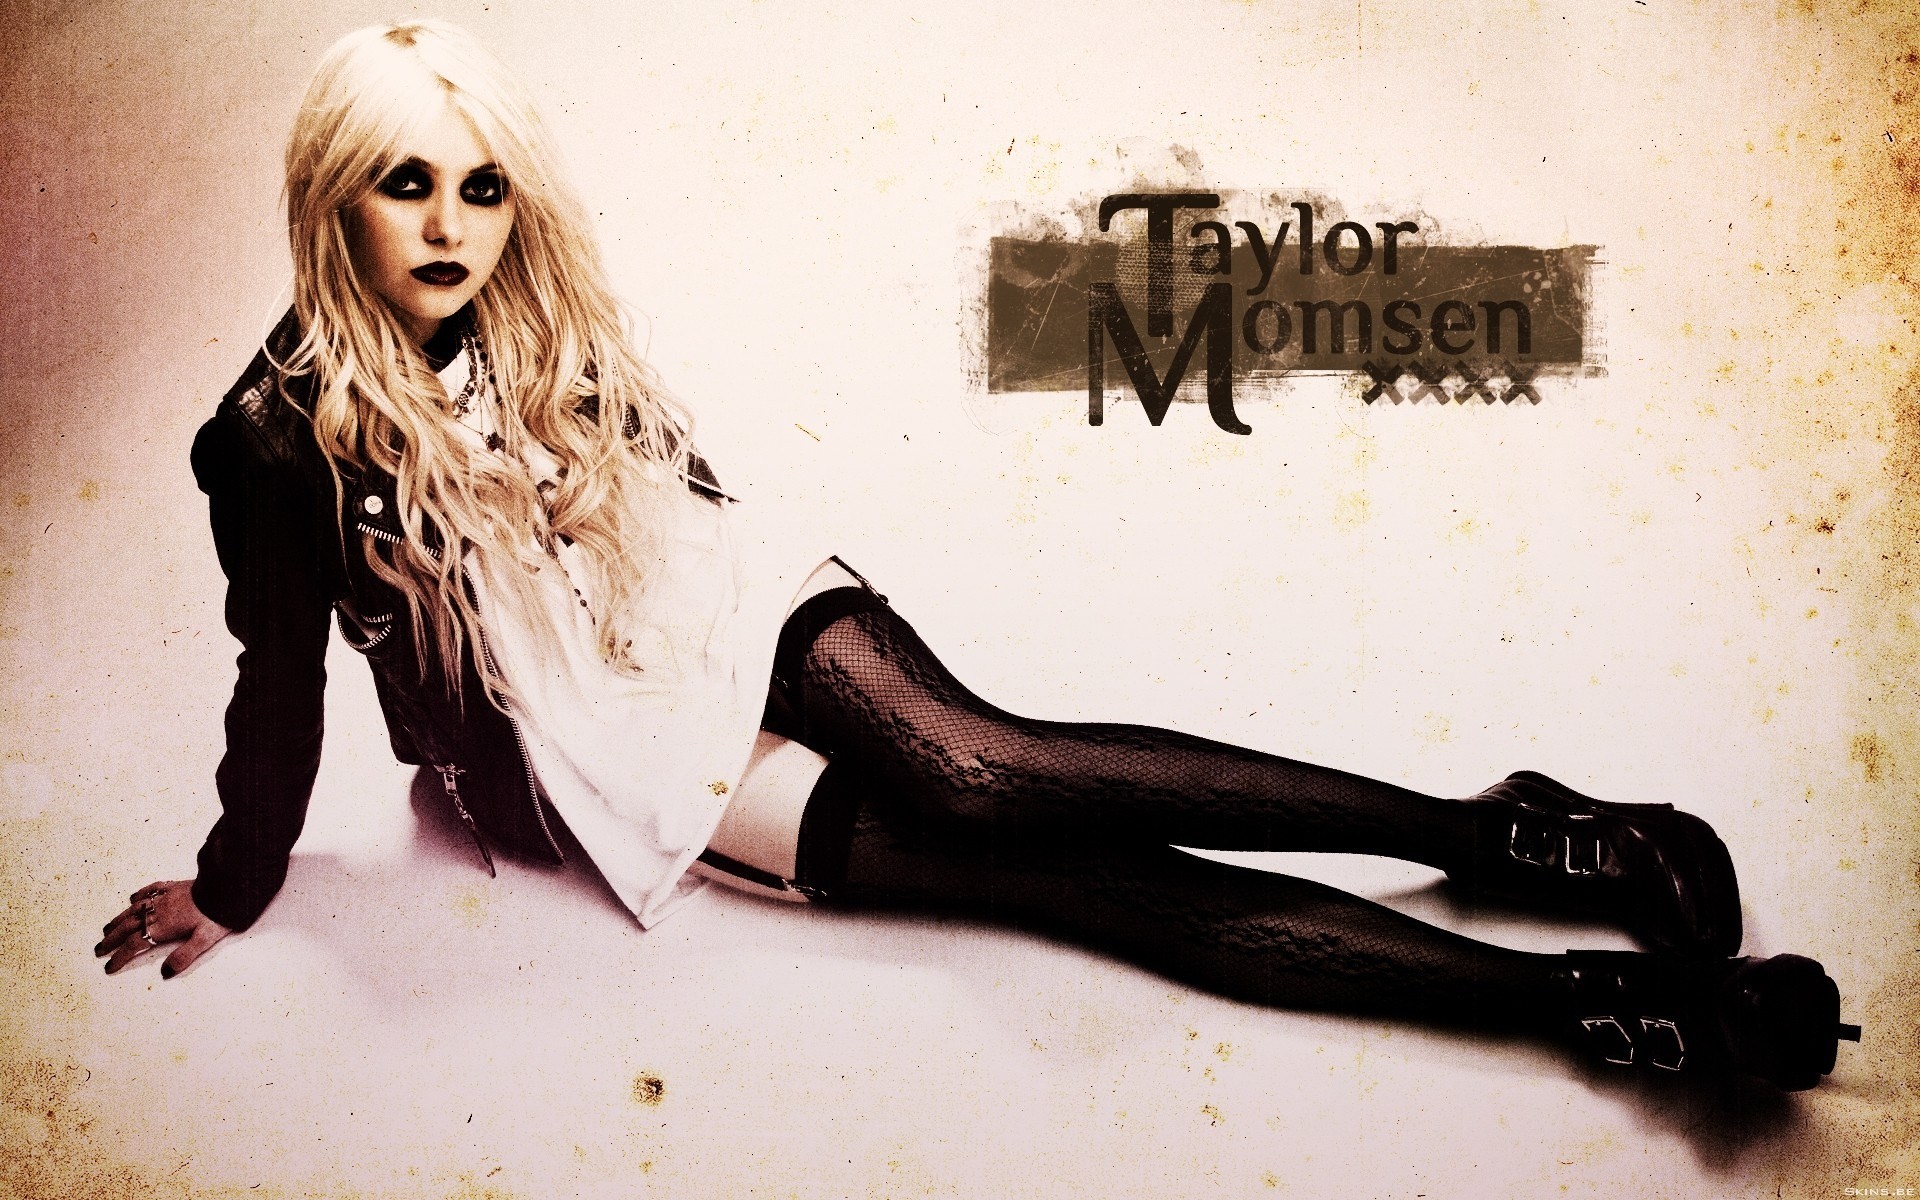 Taylor momsen pic free hd widescreen – taylor momsen category